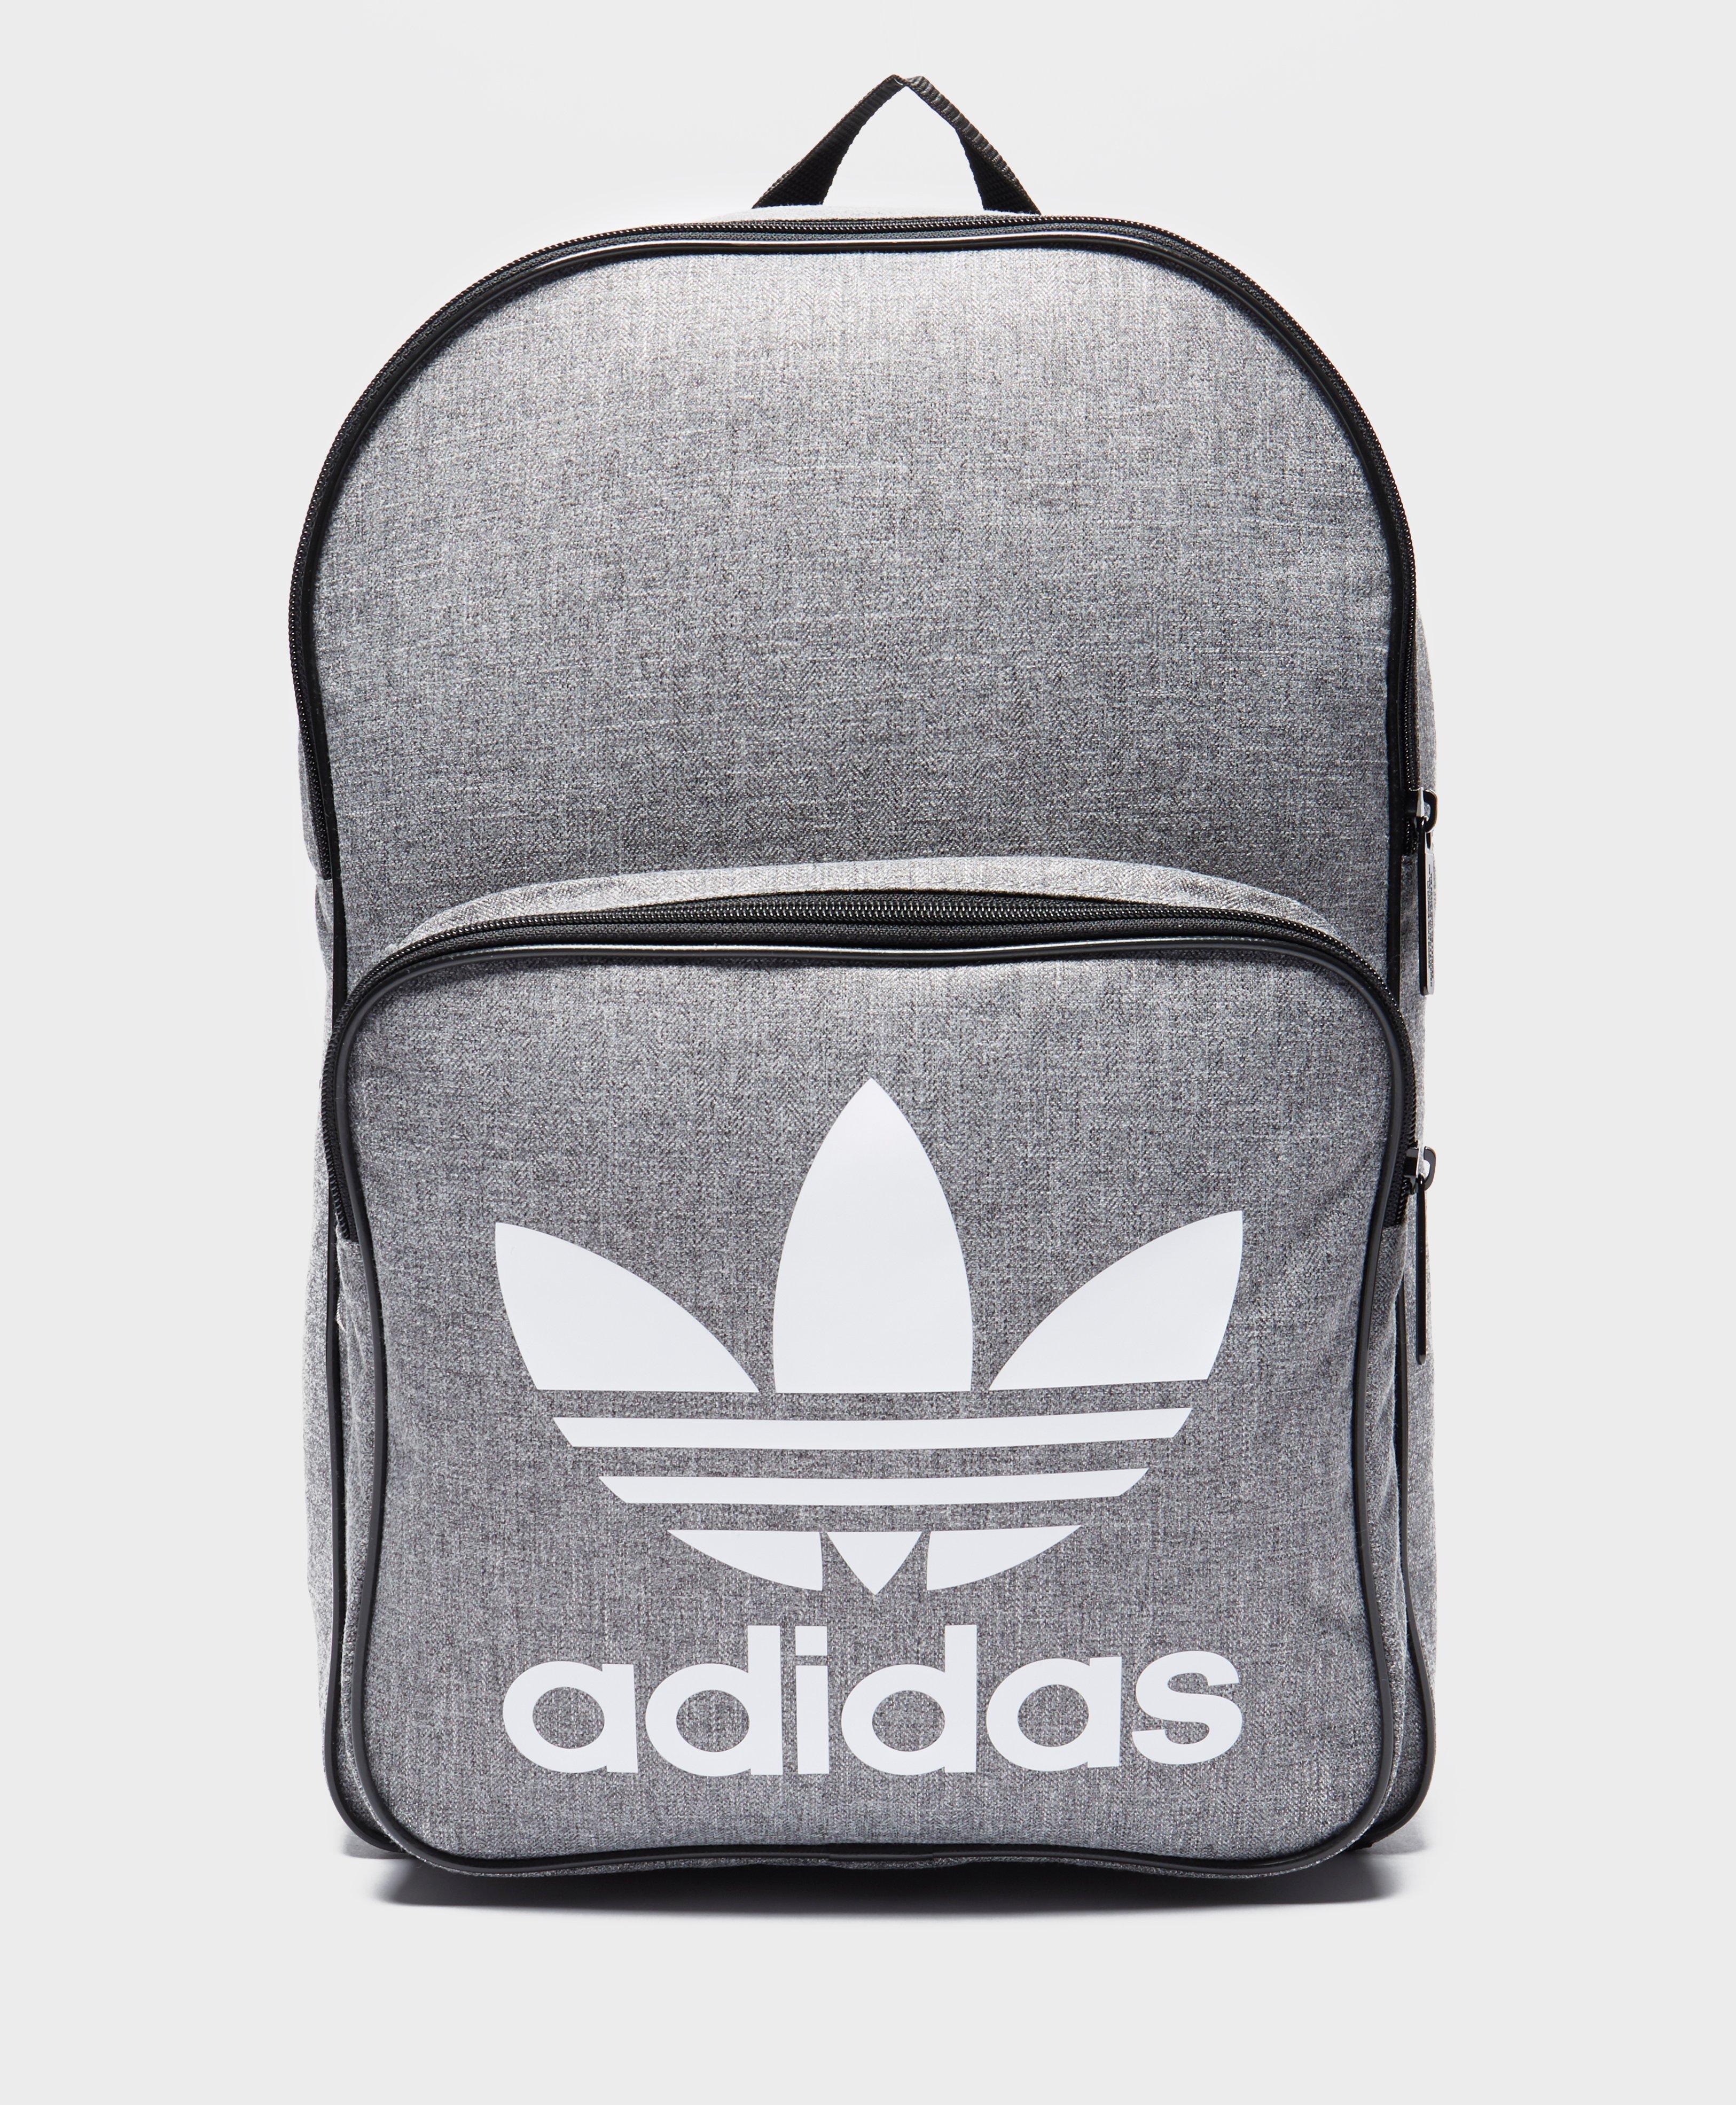 adidas Originals Synthetic Classic Trefoil Backpack in Grey for Men - Lyst